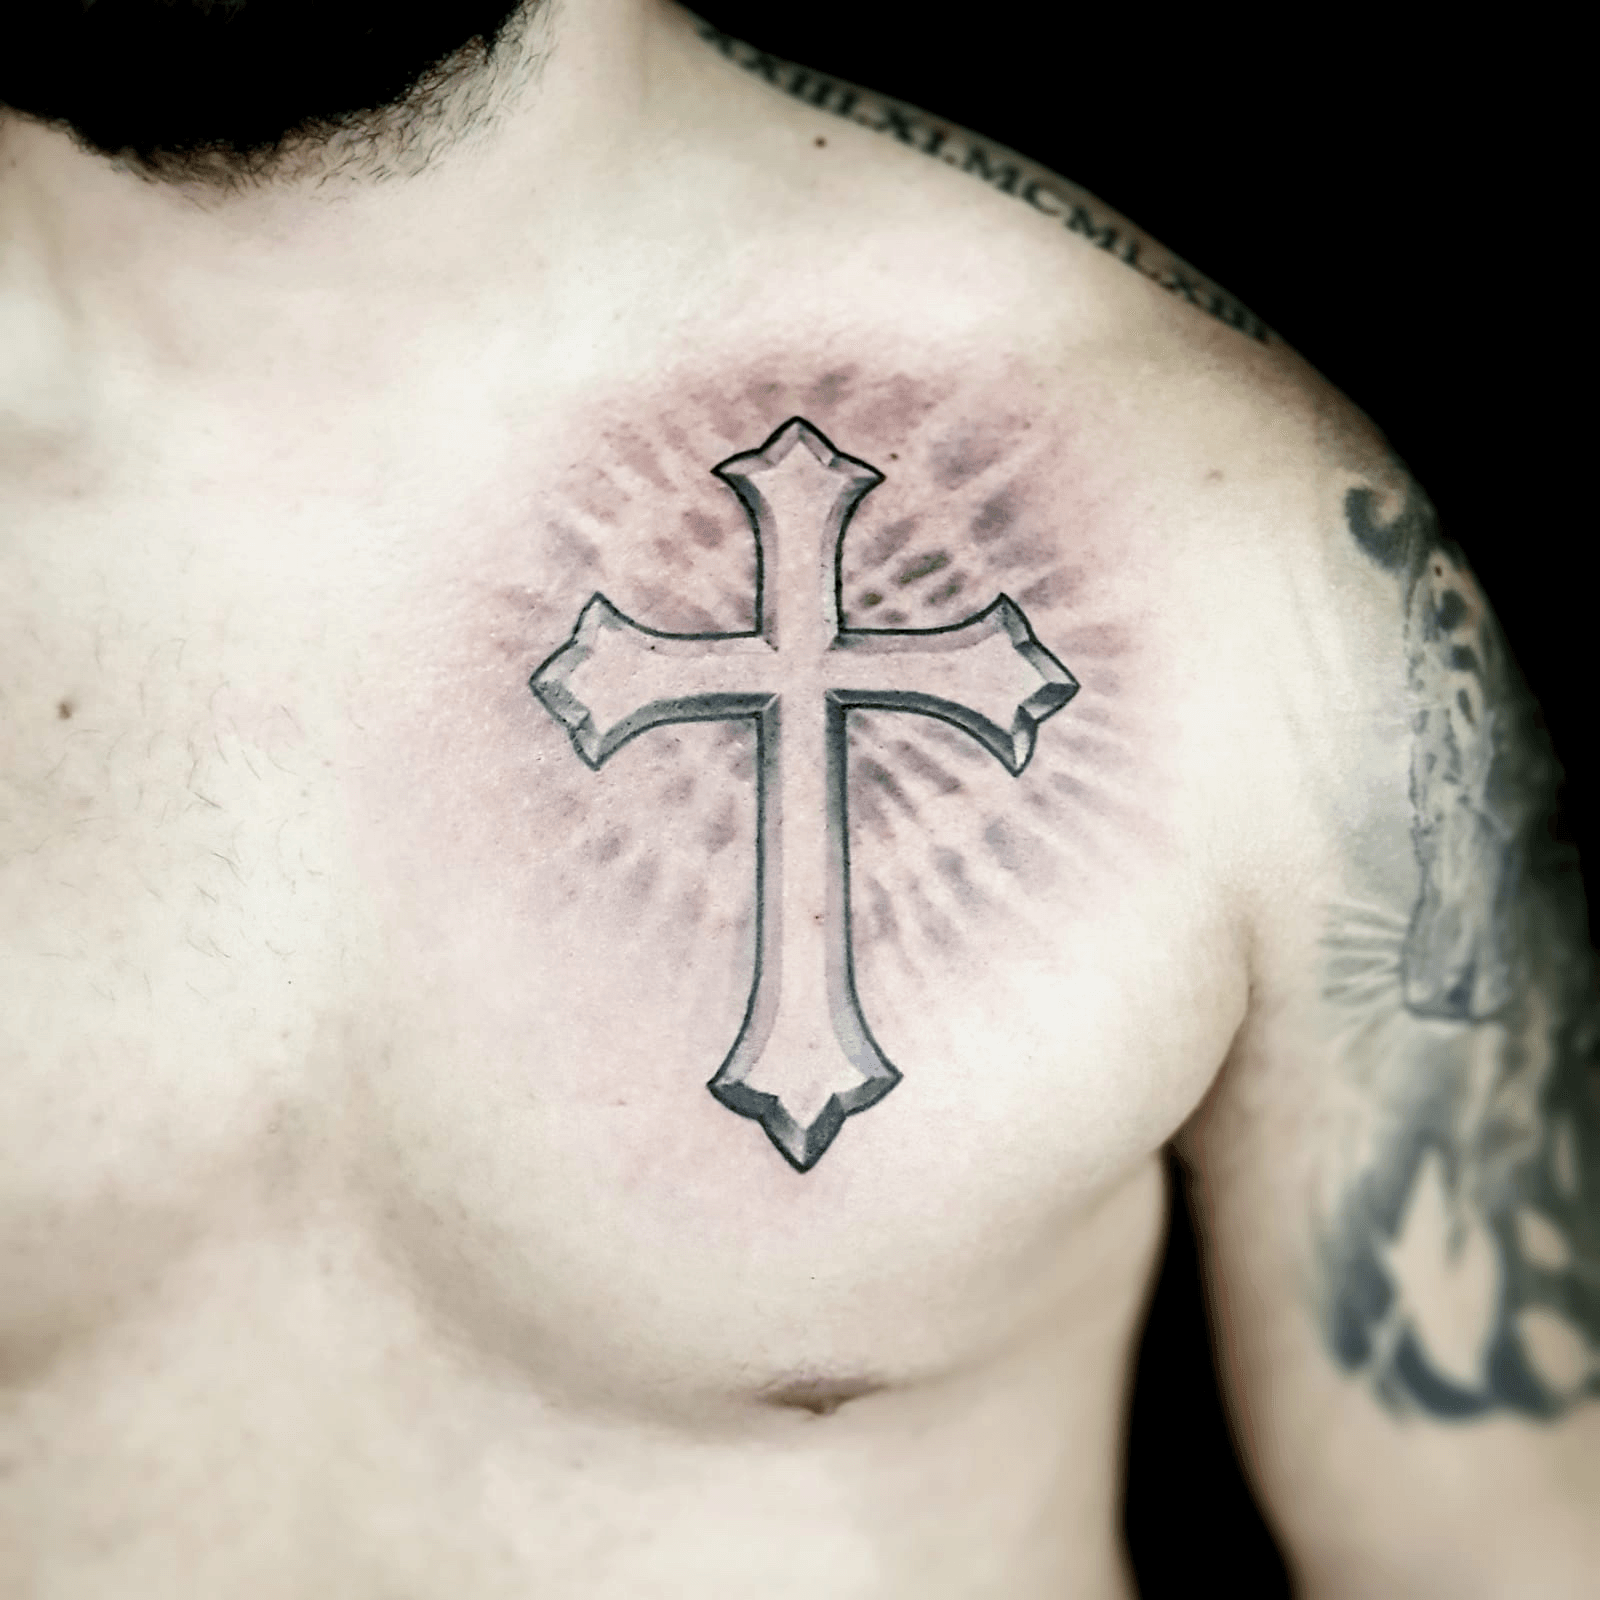 A Shirtless Man with Cross Tattoo on His Chest  Free Stock Photo